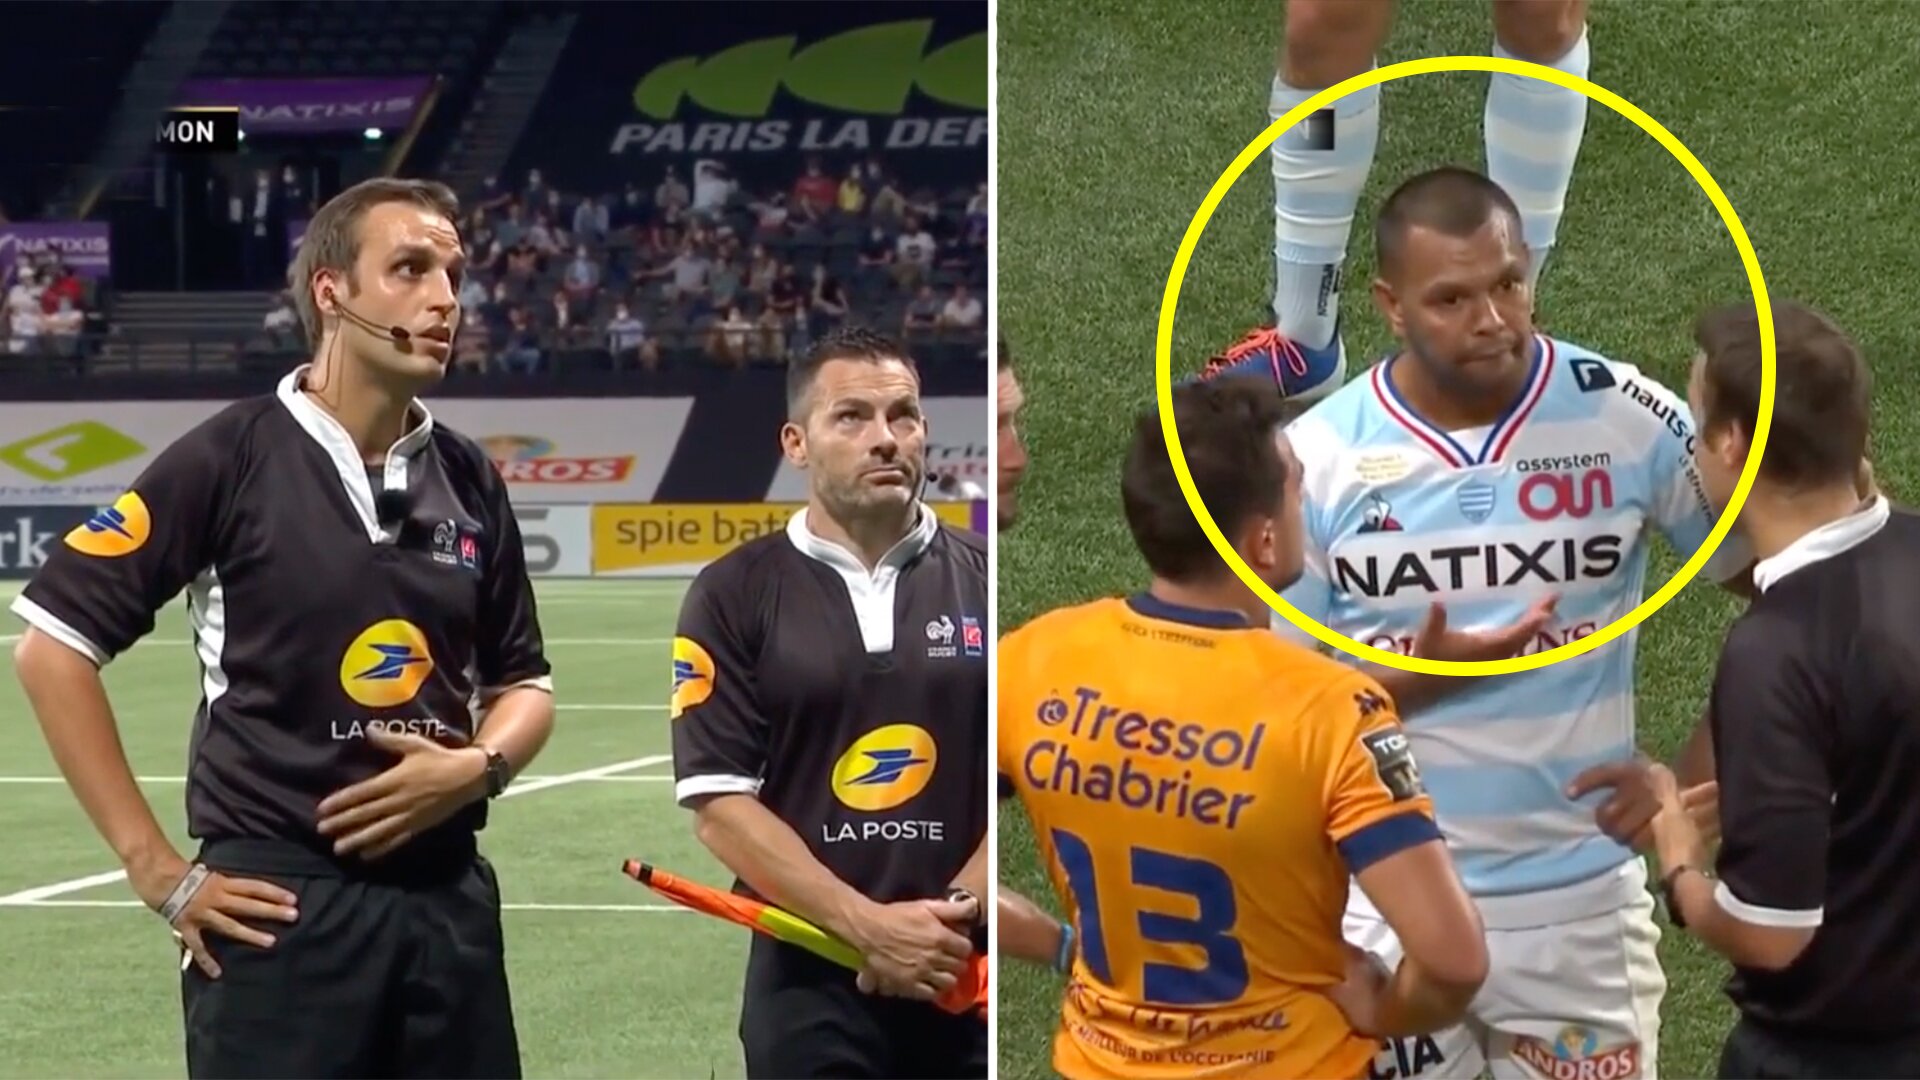 Kurtley Beale had possibly the worst start to his second Racing 92 game that you could imagine